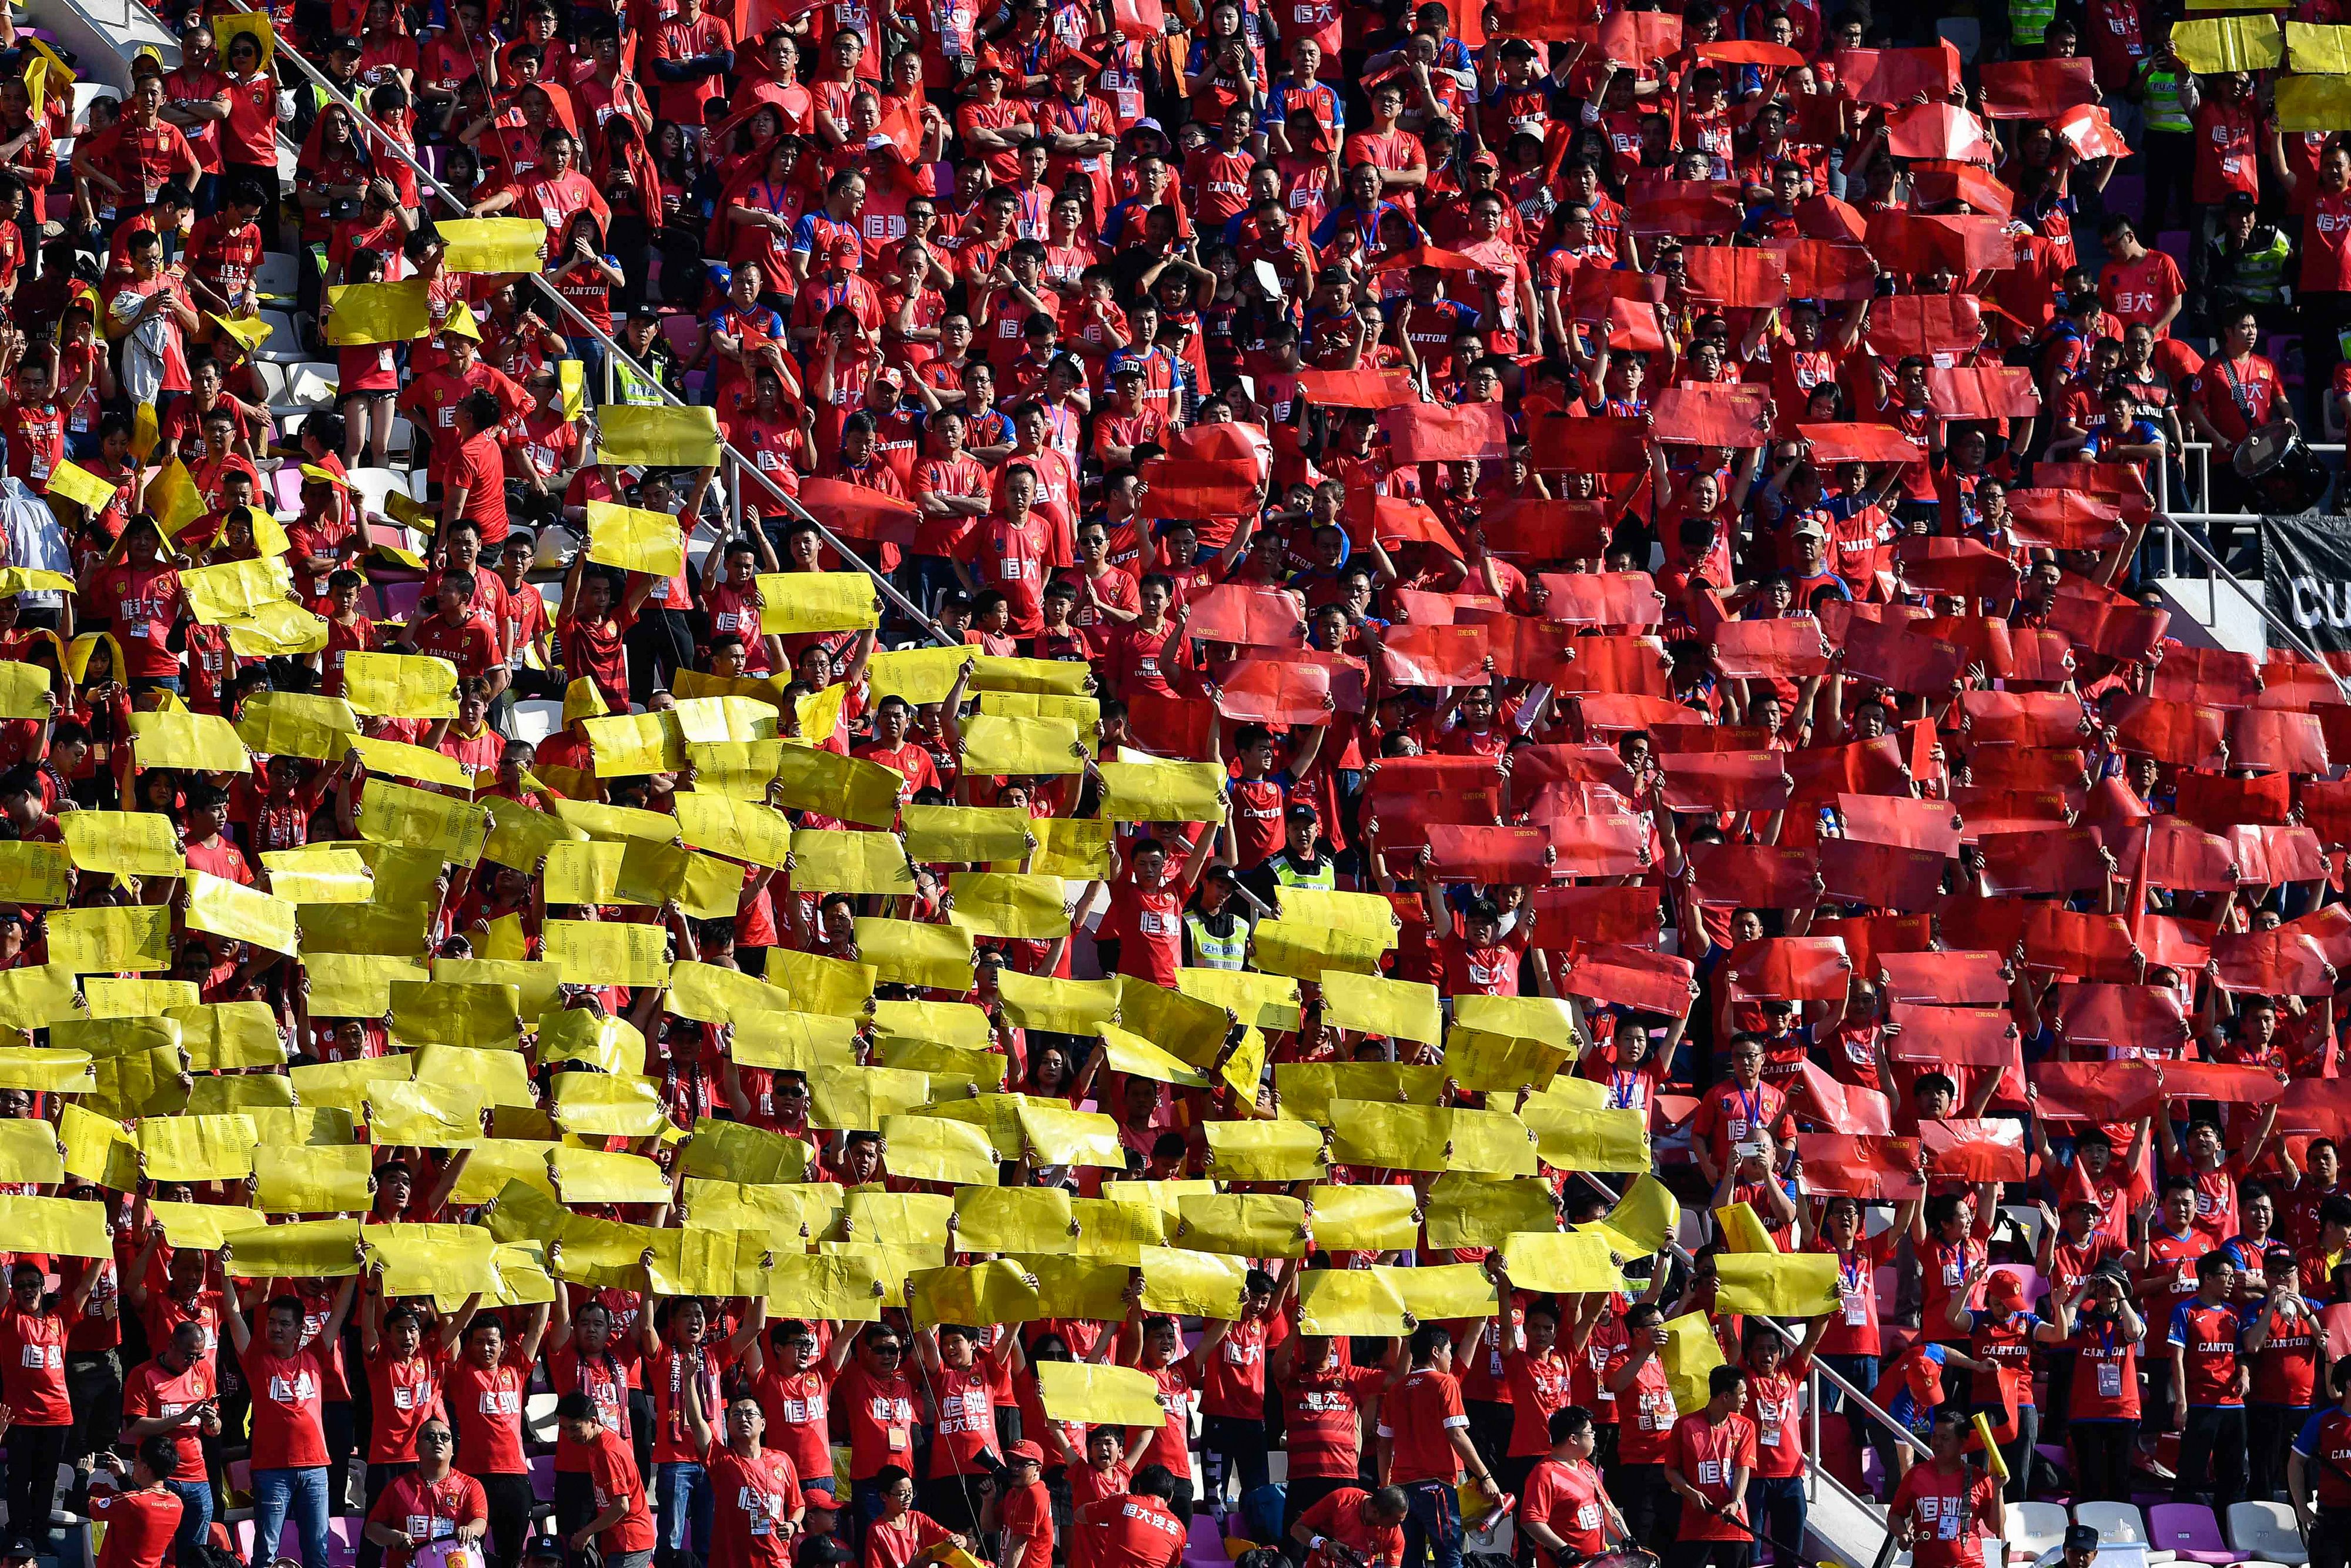 Fans of Guangzhou Evergrande cheer for the team during the Chinese Super League (CSL) match between Guangzhou Evergrande and Shanghai Shenhua in Guangzhou.